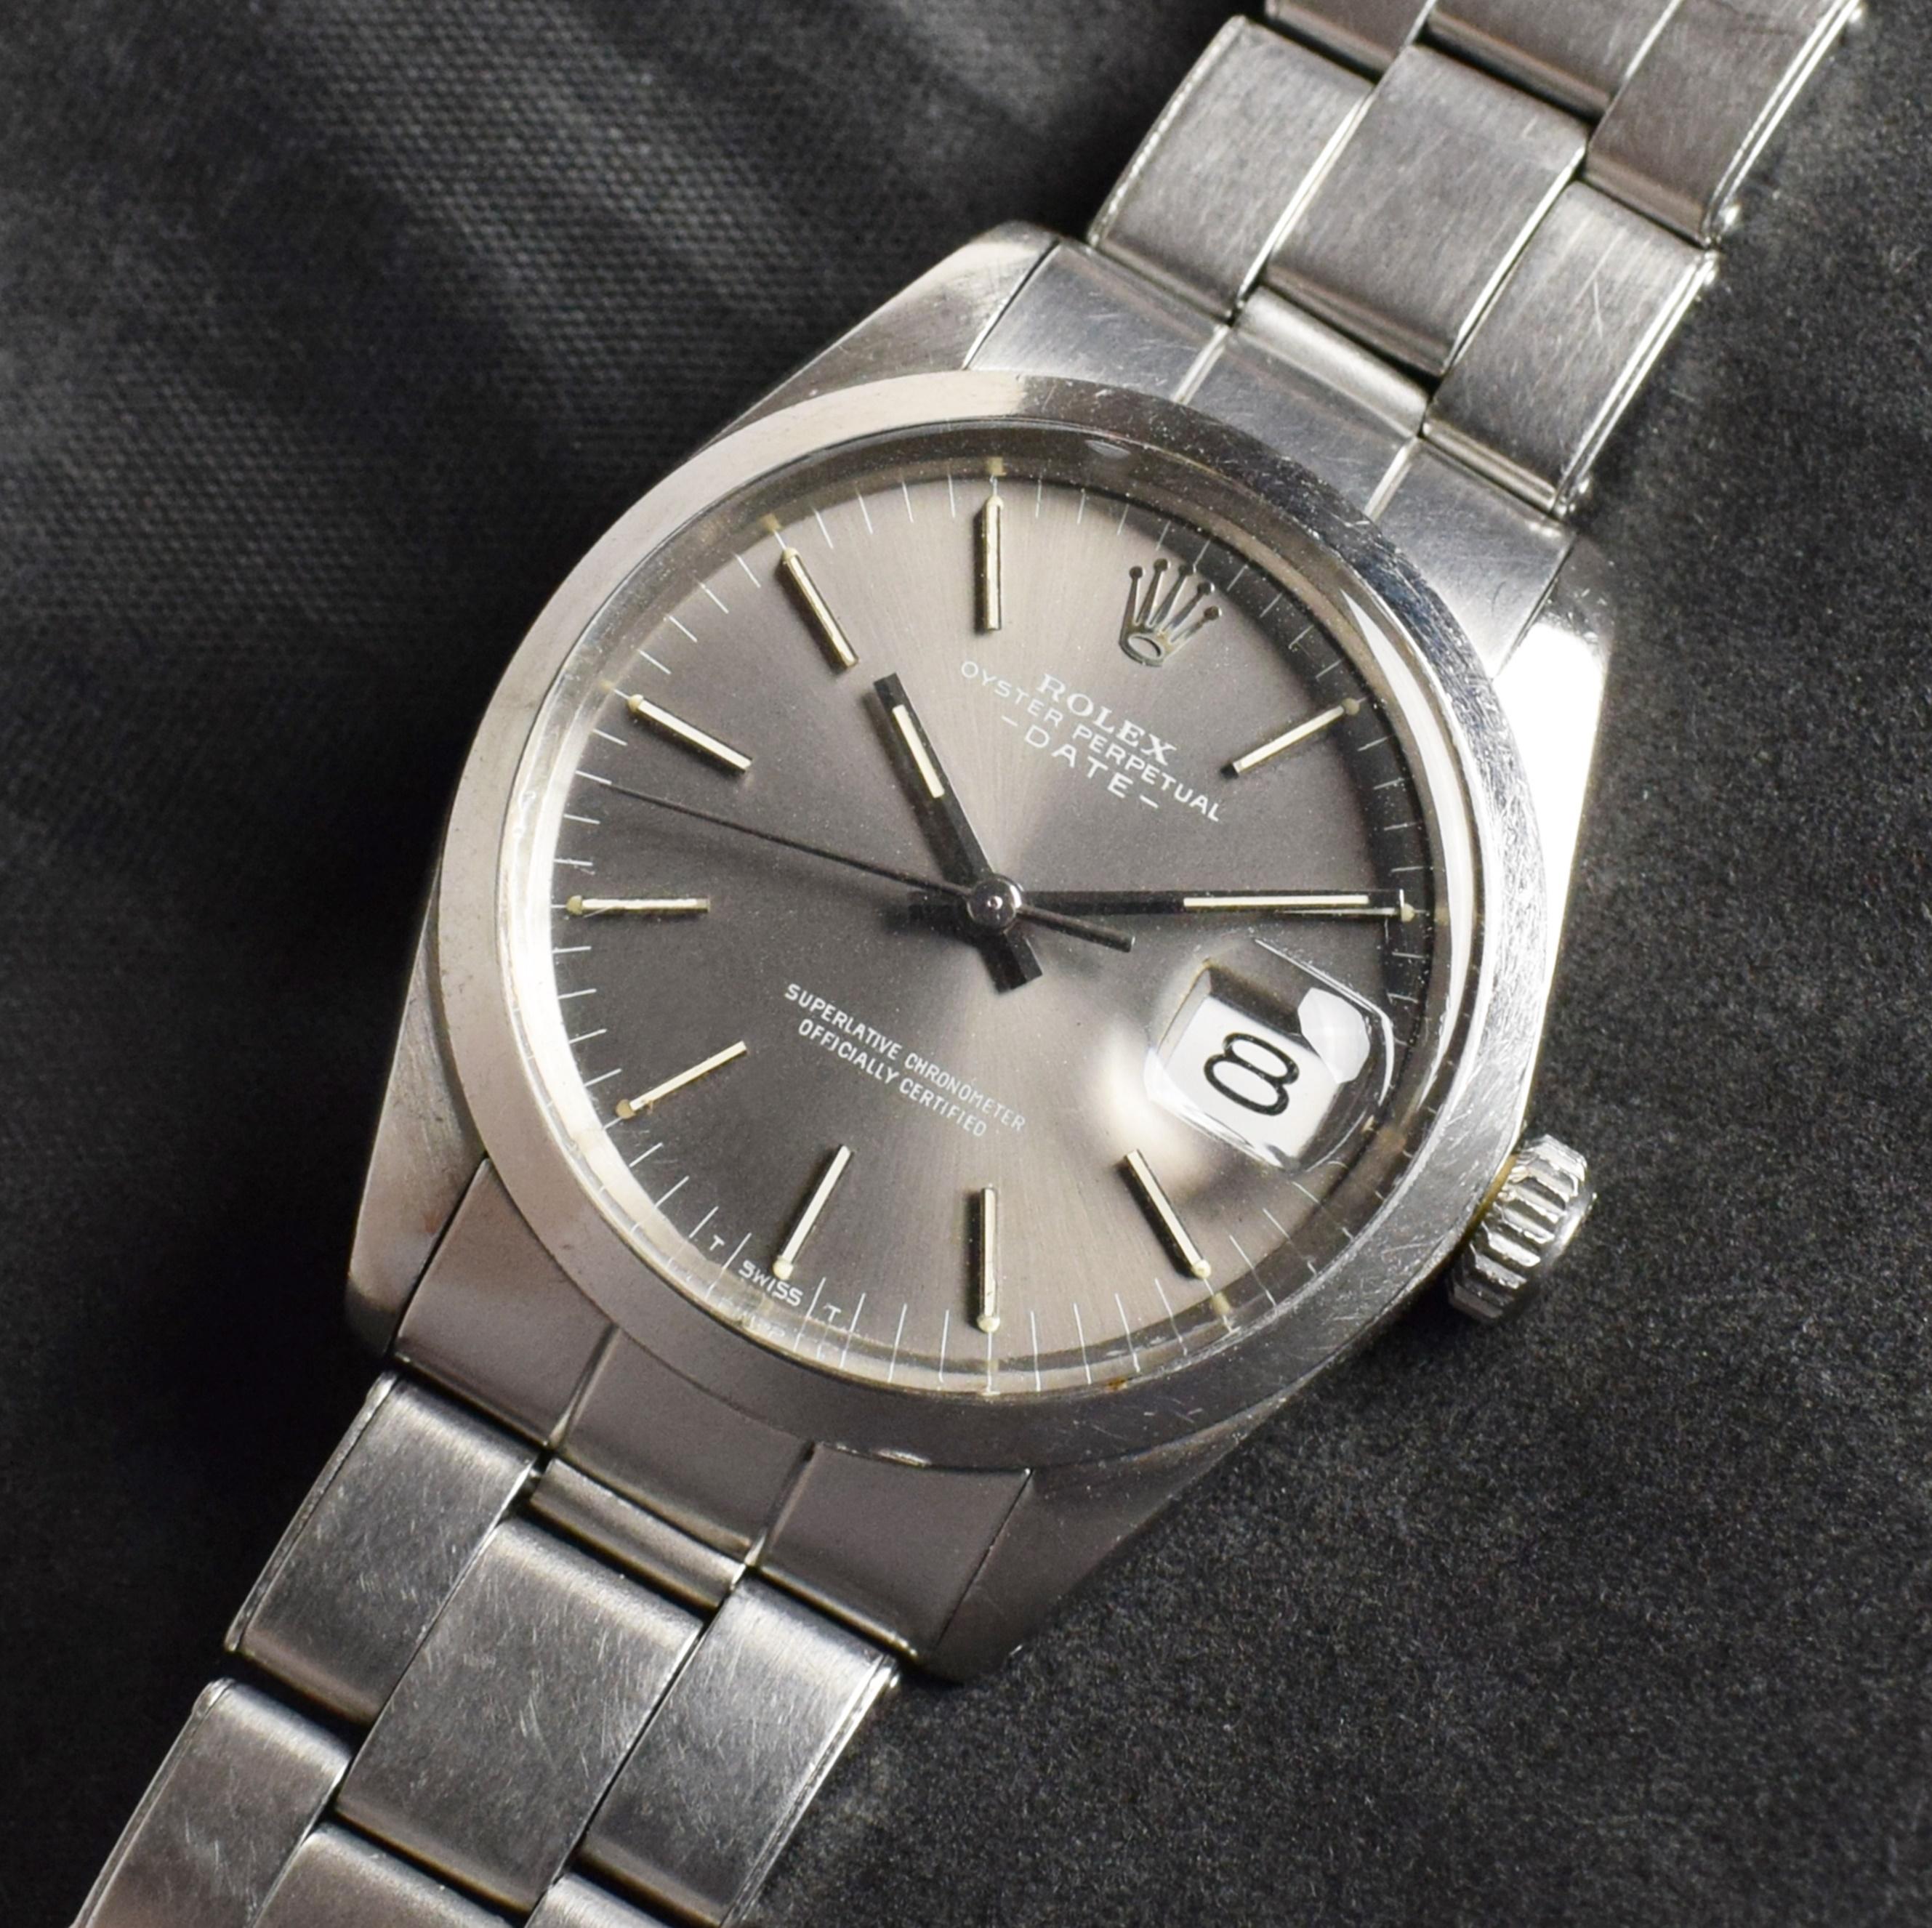 Brand: Vintage Rolex
Model: 1500
Year: 1969
Serial number: 20xxxxx
Reference: C03481

Case: 34mm without crown; Show sign of wear with slight polish from previous; inner case back stamped 1500 I.69

Dial: Aged Clean Condition Grey Dial with matching